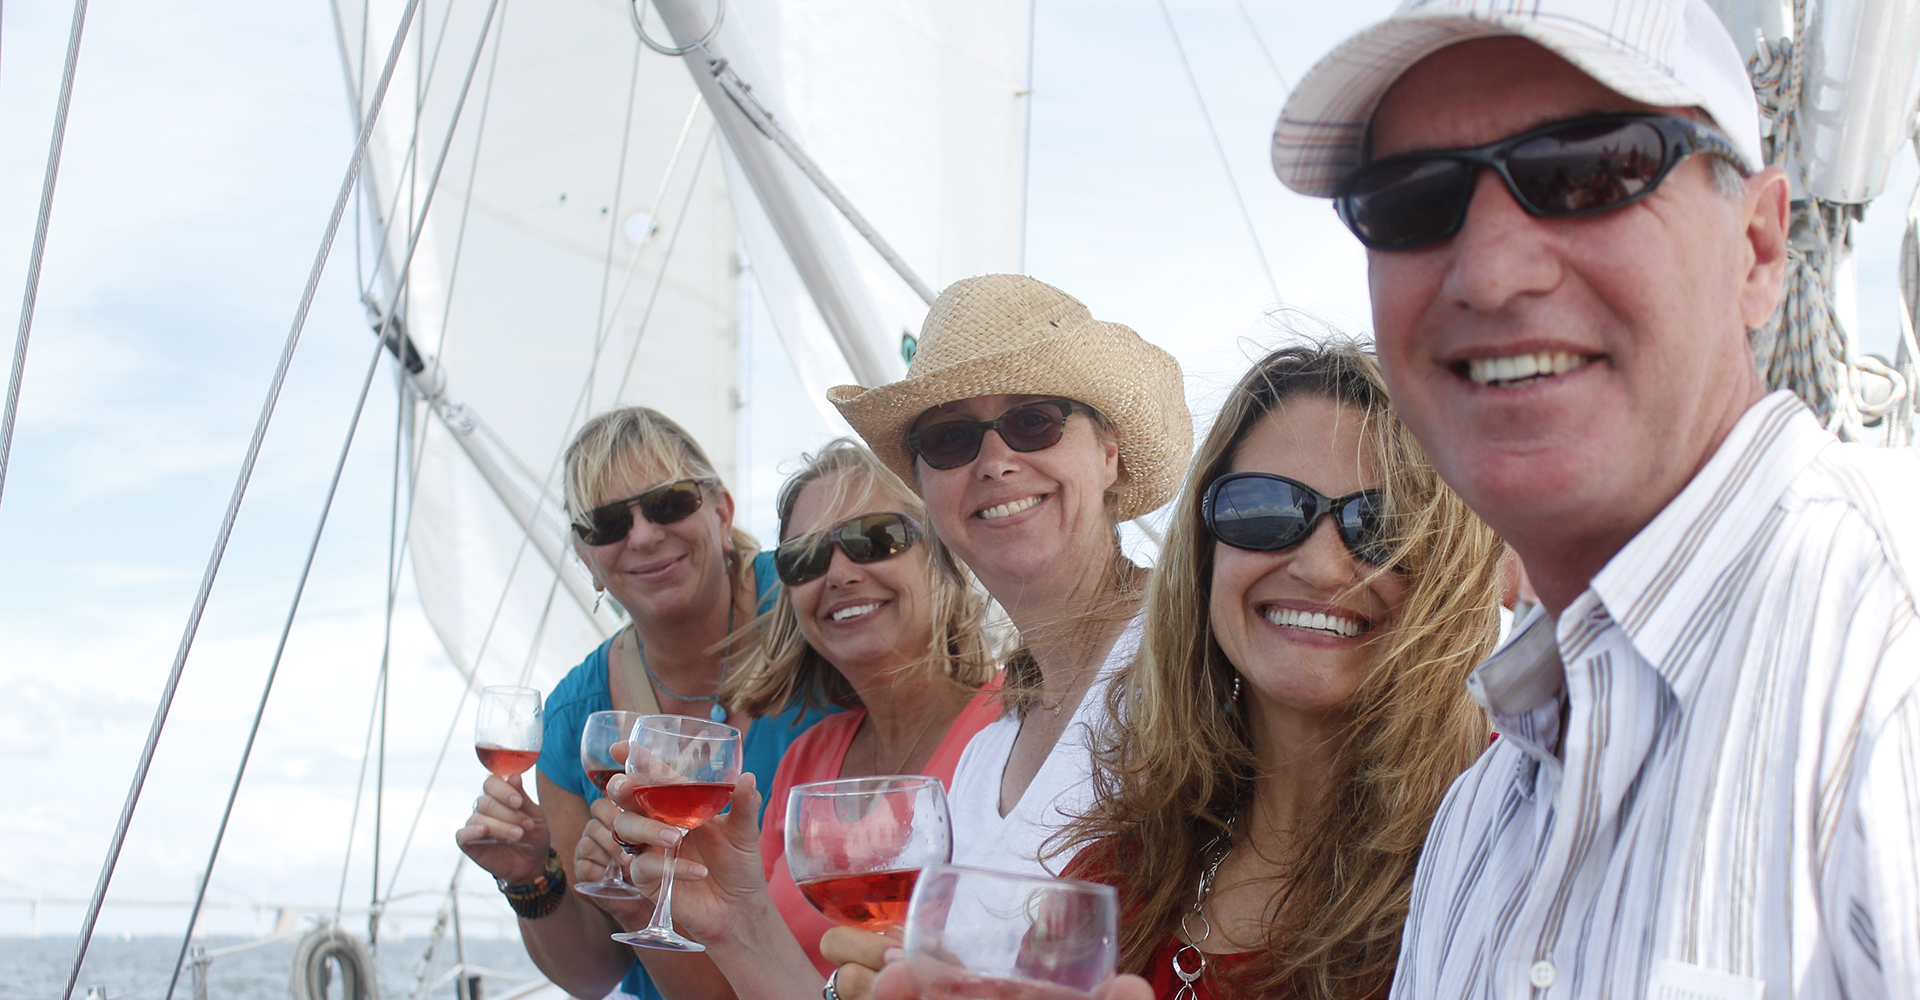 Guests with sunglasses and smiles enjoying glasses of wine on the boat